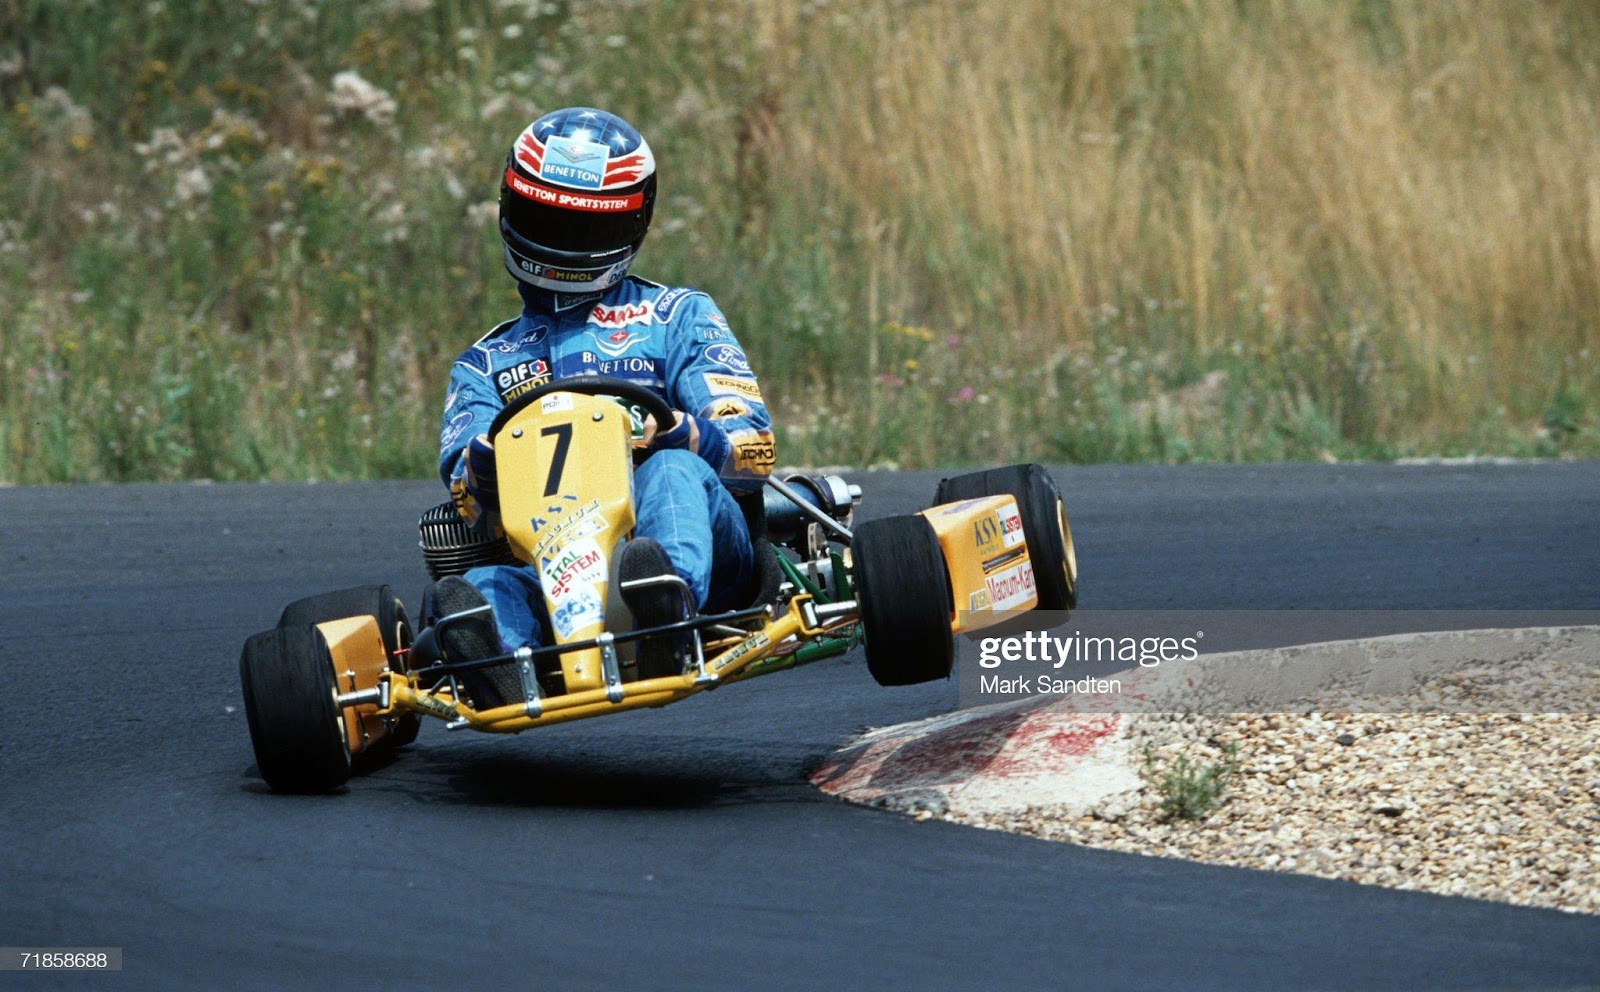 Michael Schumacher in action after the press conference on the go-cart circuit on July 1, 1994 in Kerpen, Germany.